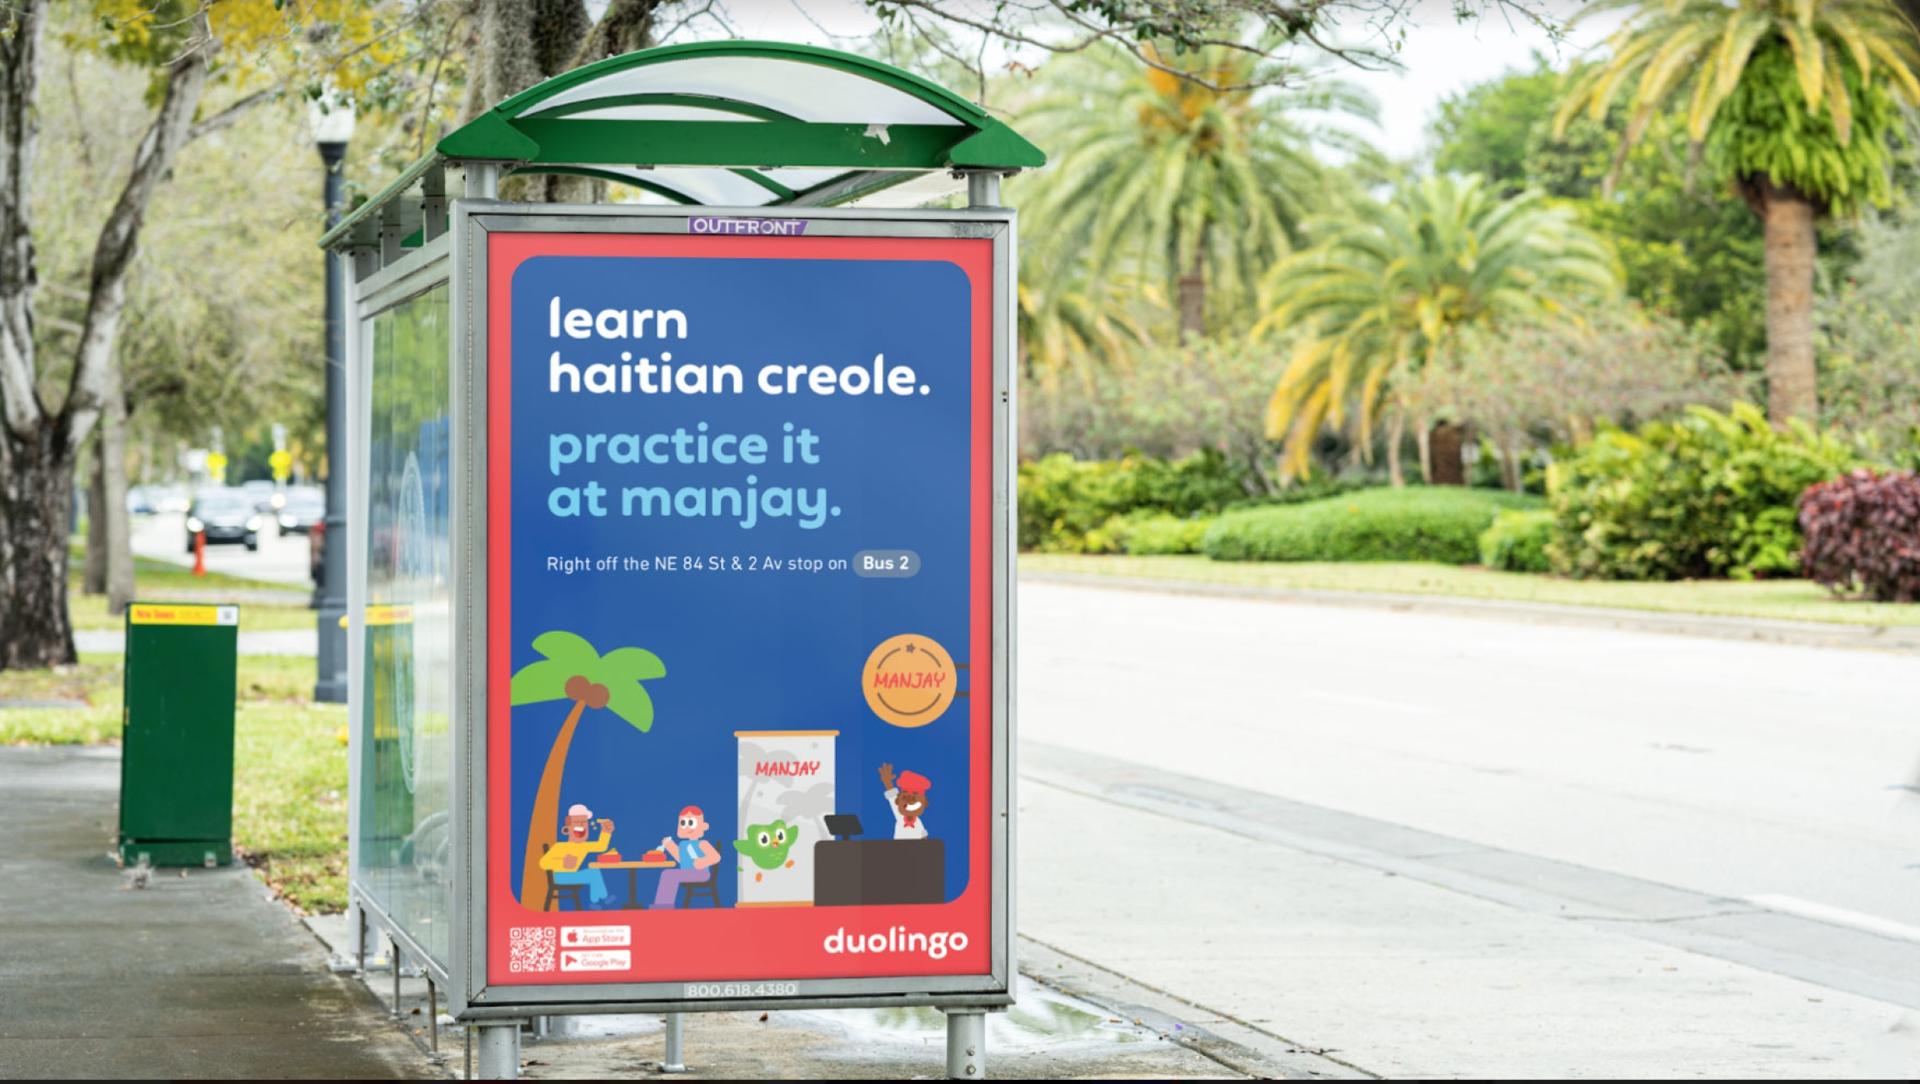 Duolingo partnered with Haitian-run businesses across the county, giving away a free month of the app’s premium subscription service when customers patronize and practice Haitian Creole participating businesses.